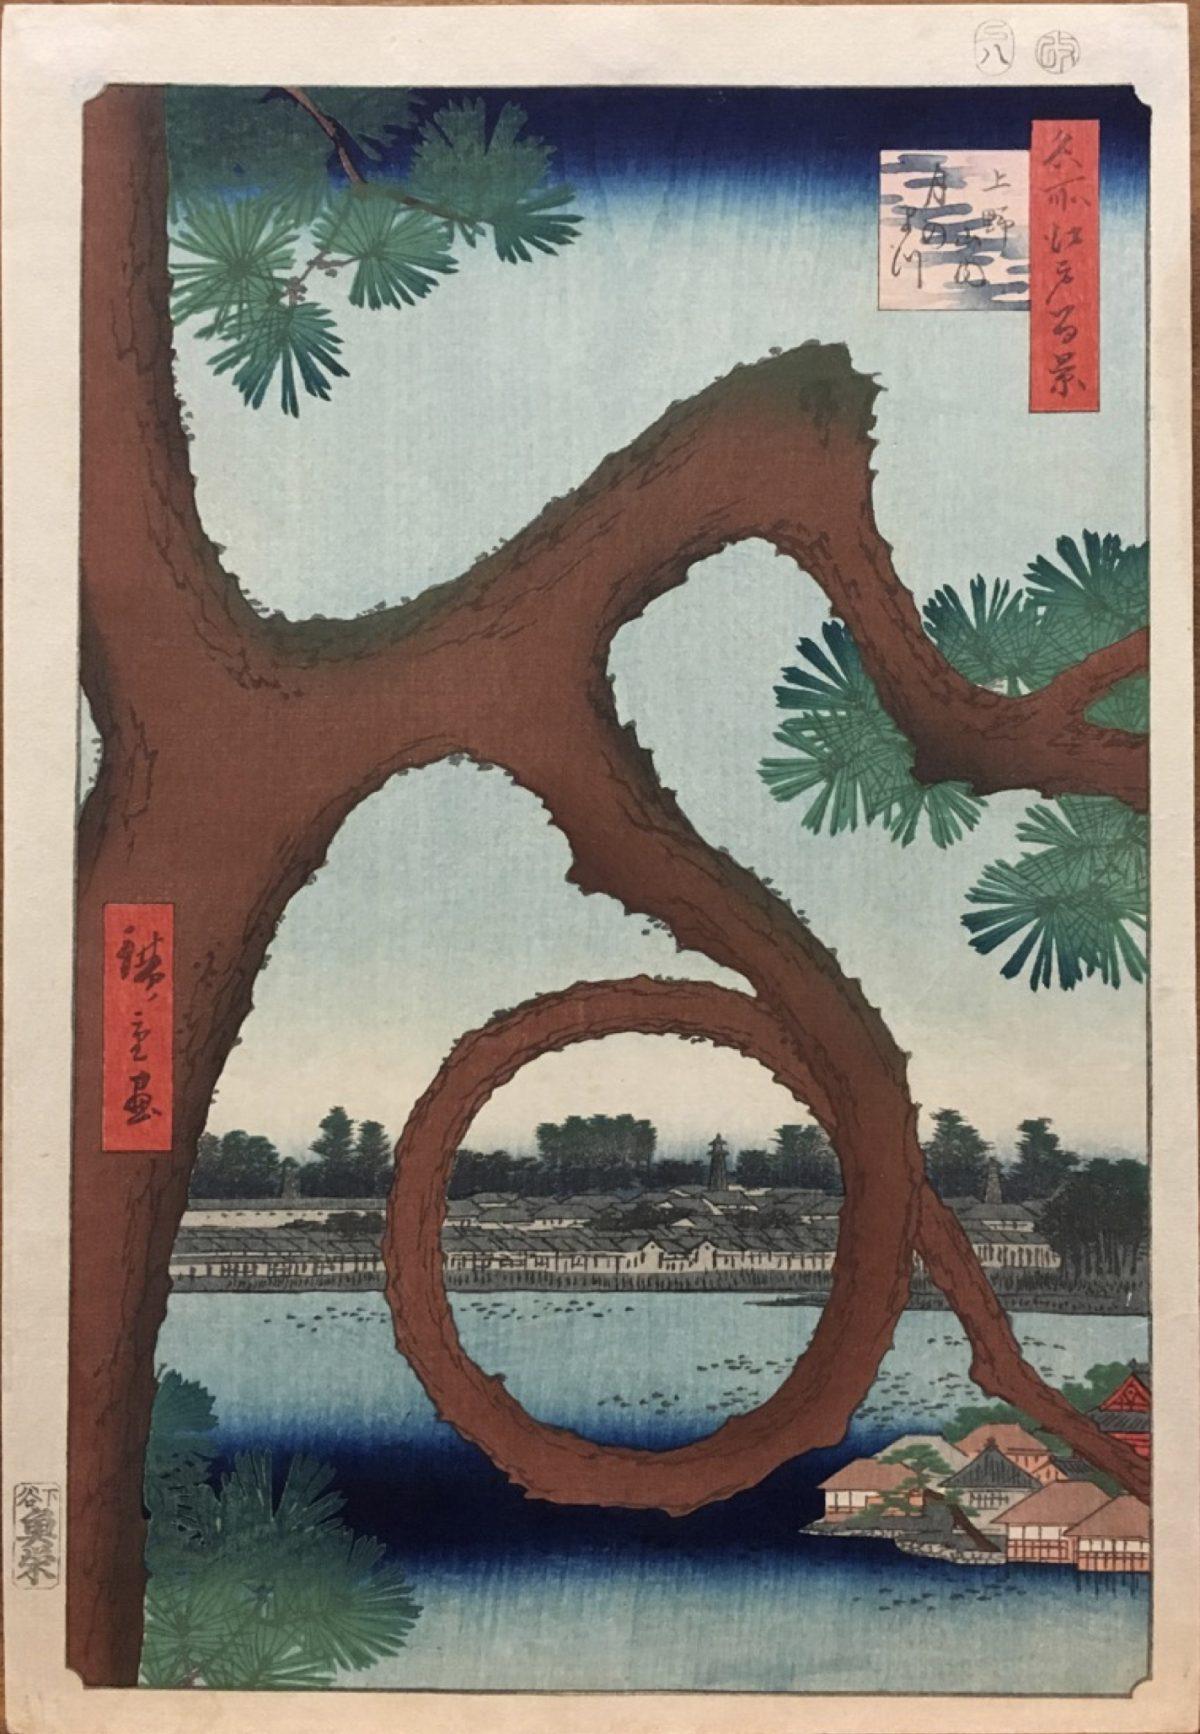 “Moon Pine at Ueno," from the series "One Hundred Views of Famous Places in Edo,” 1857, Edo period (1615–1868), by Ando Hiroshige 安藤広重. Published by Uoya Eikichi. Woodblock print (oban tate-e format), ink and color on paper, 14 7/16 inches by 9 13/16 inches. Laura P. Hall Memorial Fund. (Princeton University Art Museum)